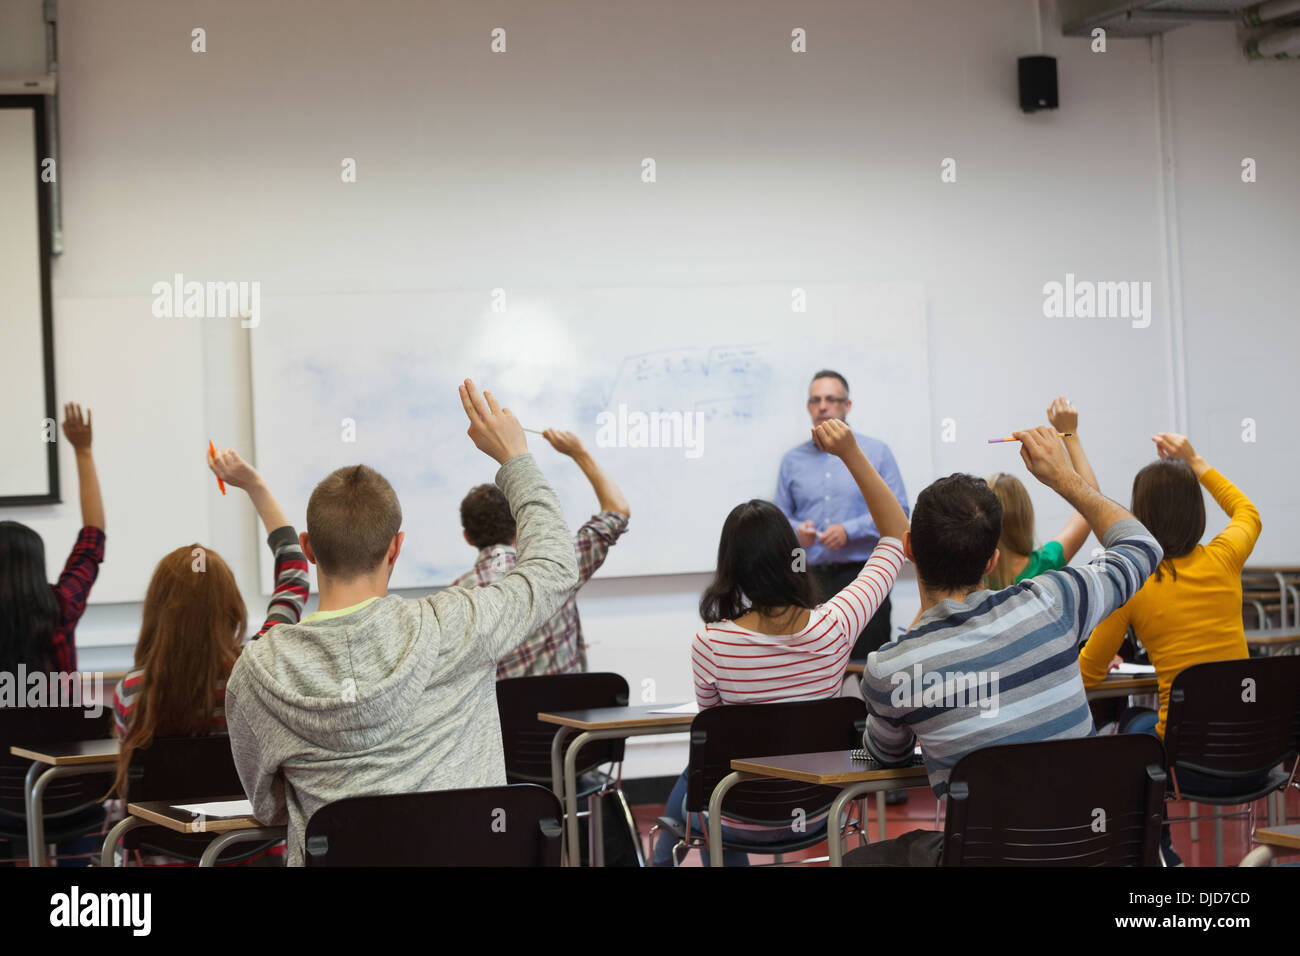 Students listening to their teacher in classroom and raising their hands Stock Photo